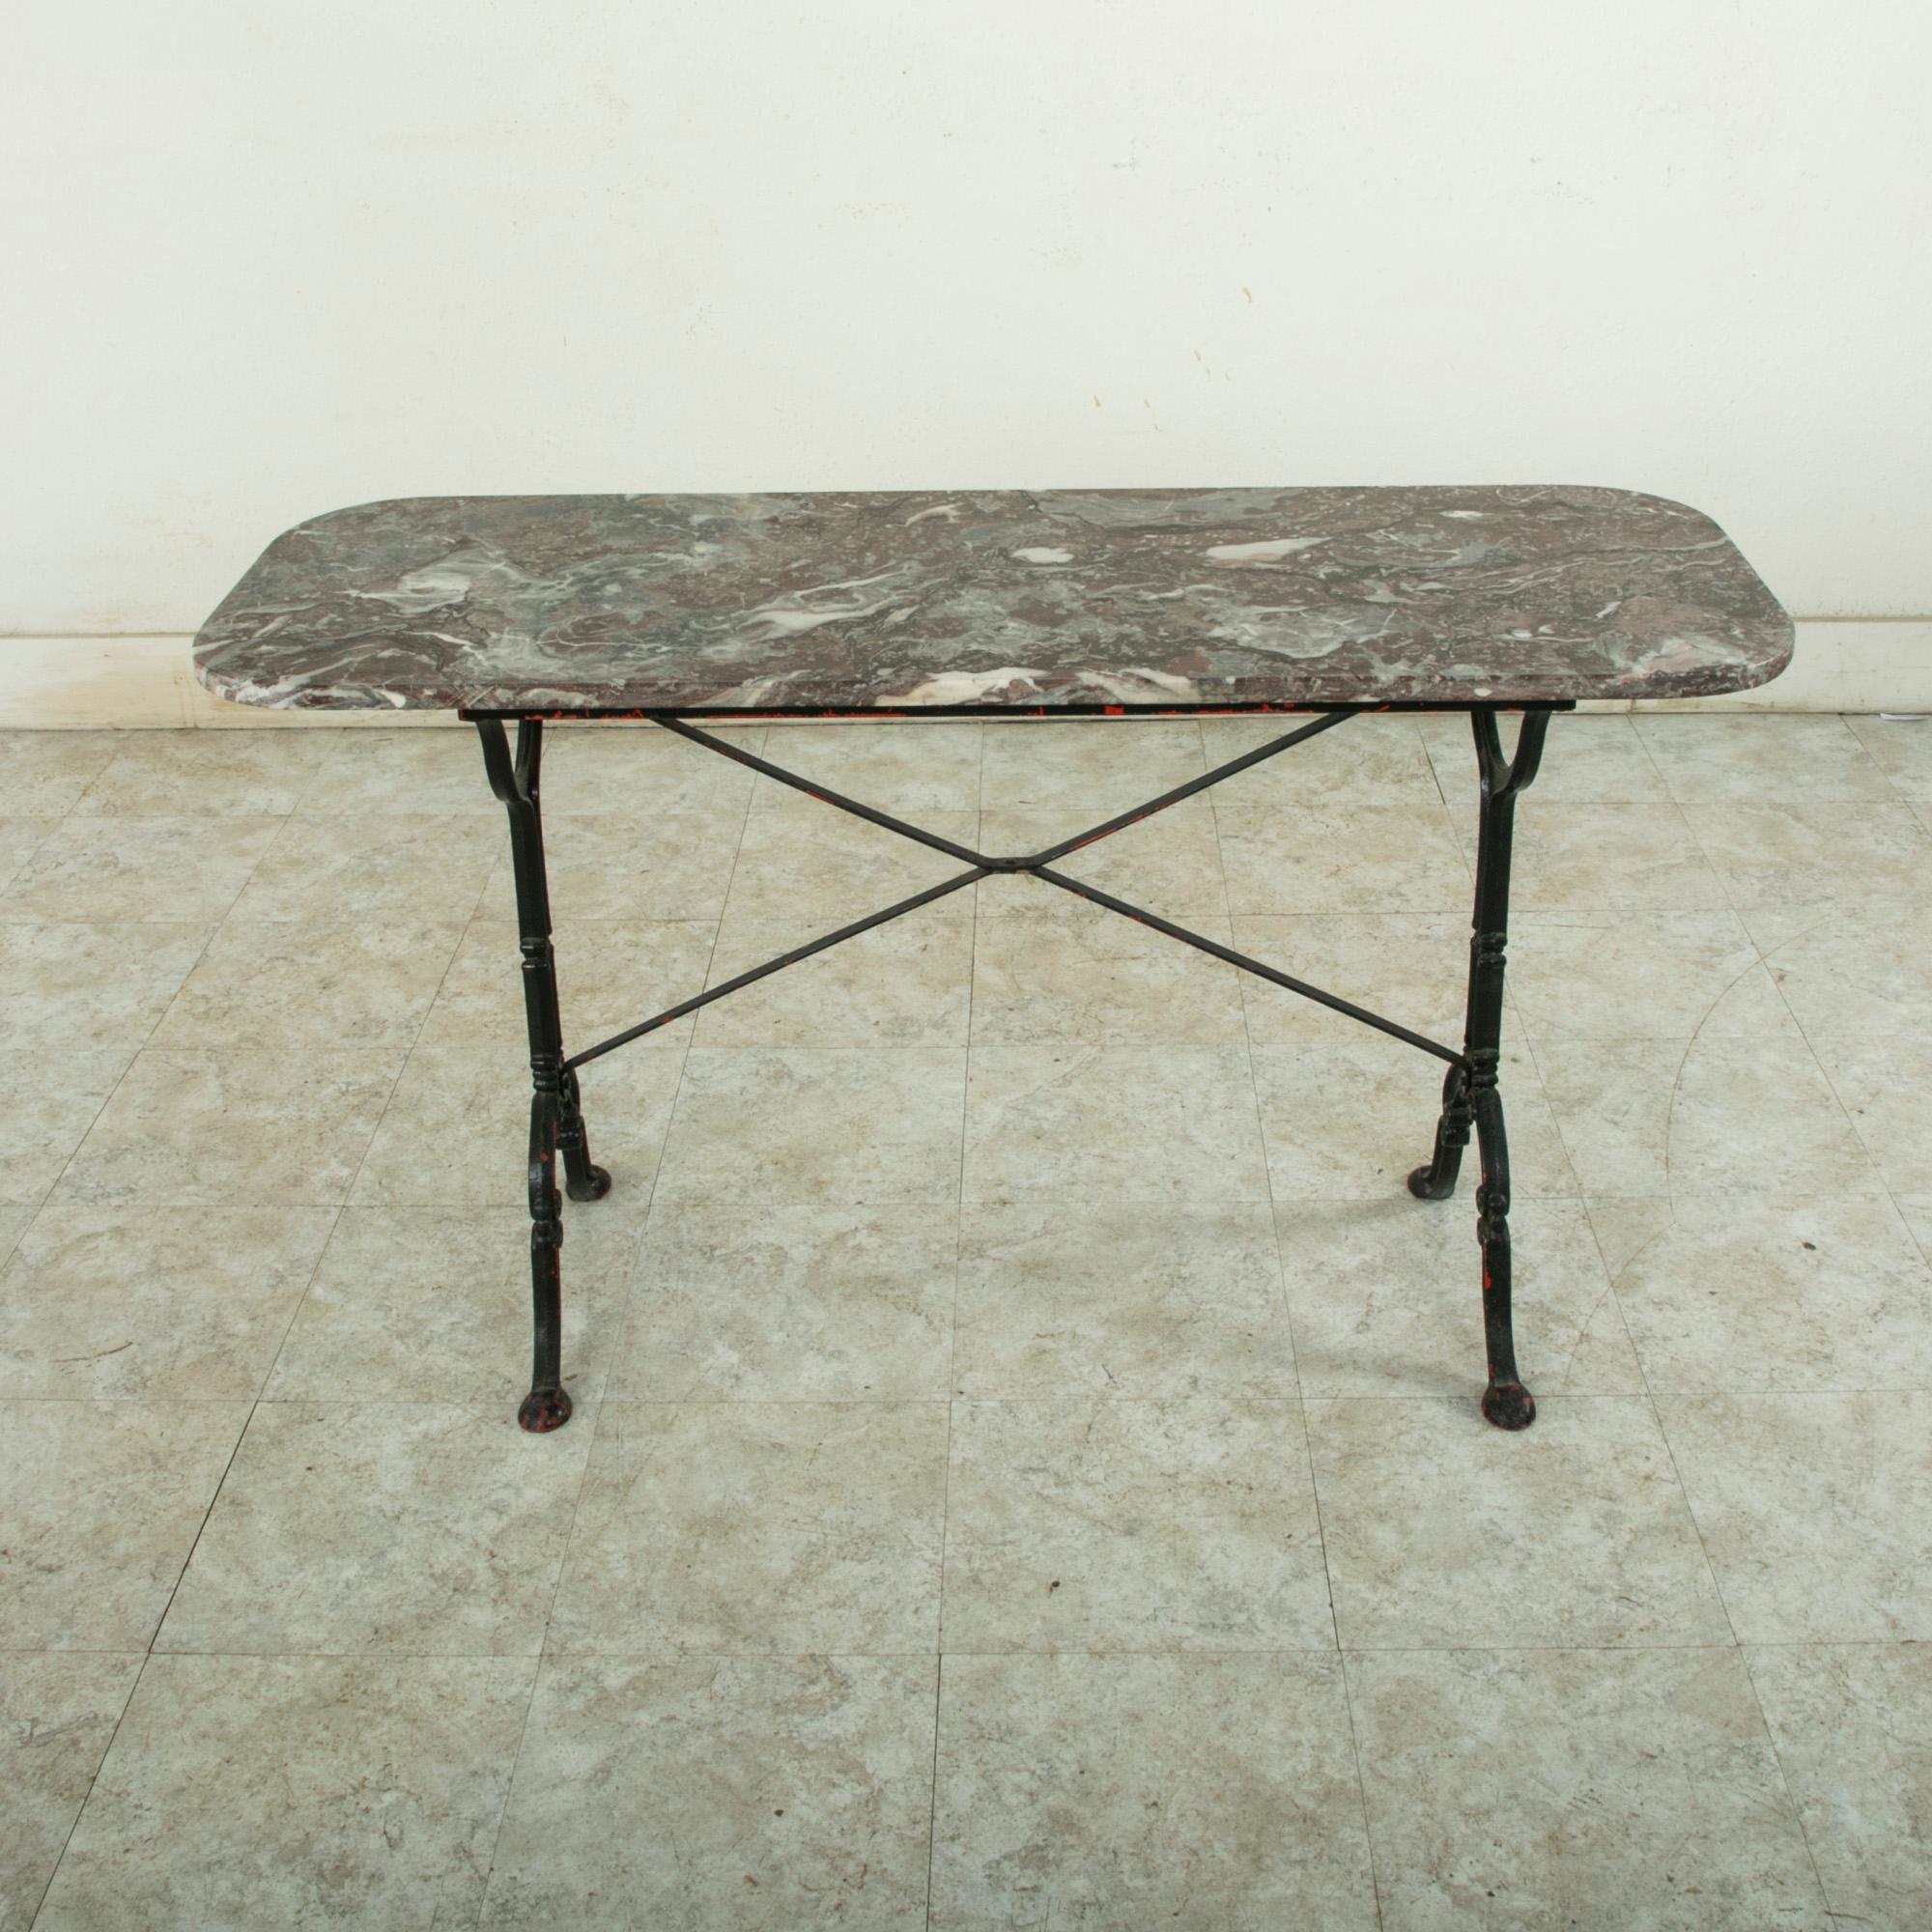 Originally used in a French brasserie during the early 20th century, this cast iron bistro table or cafe table features a solid grey, white, and rose colored marble top. Scrolled iron legs support the top and are joined by an X-stretcher that